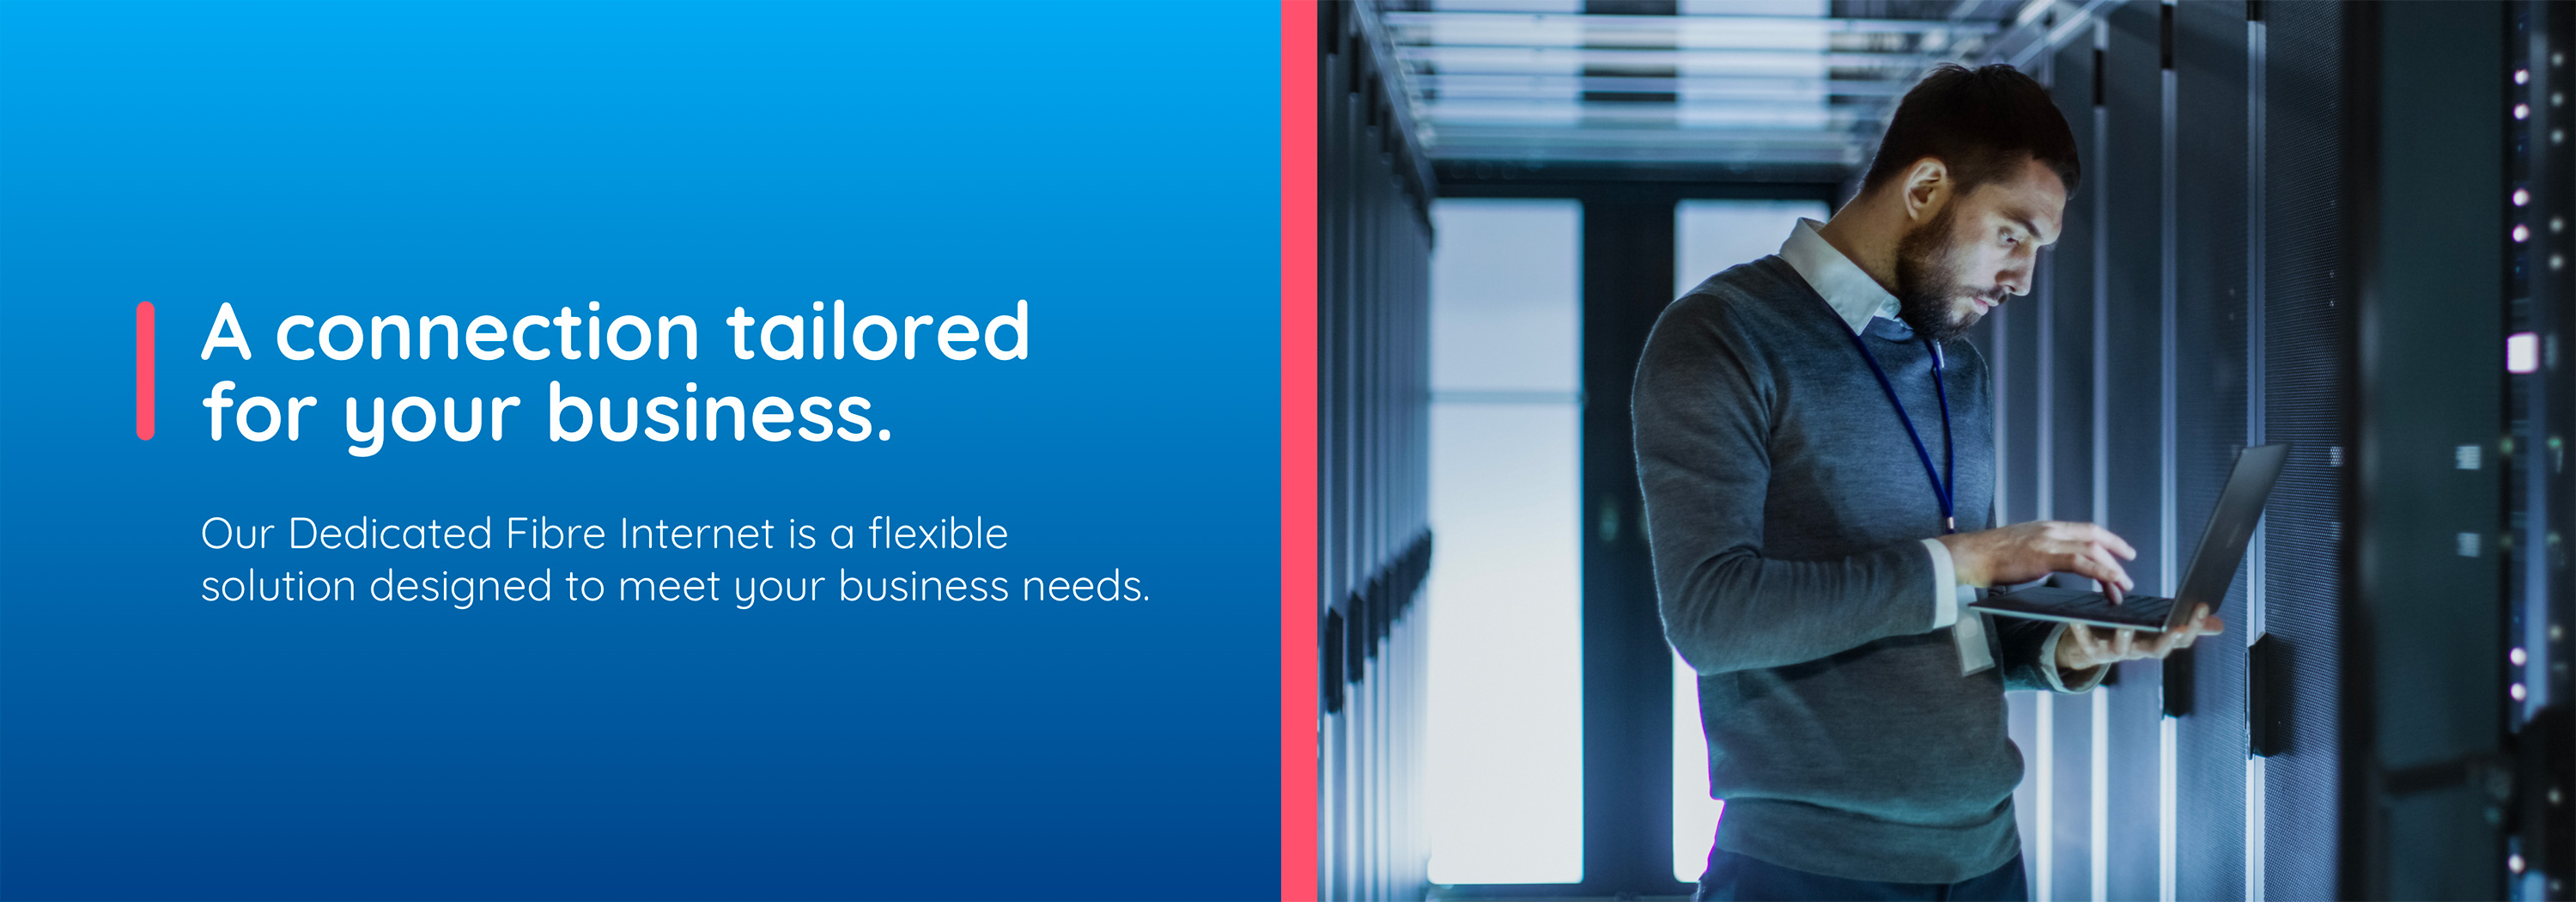 A connection tailored for your business. Our Dedicated Fibre Internet is a flexible  solution designed to meet your business needs.